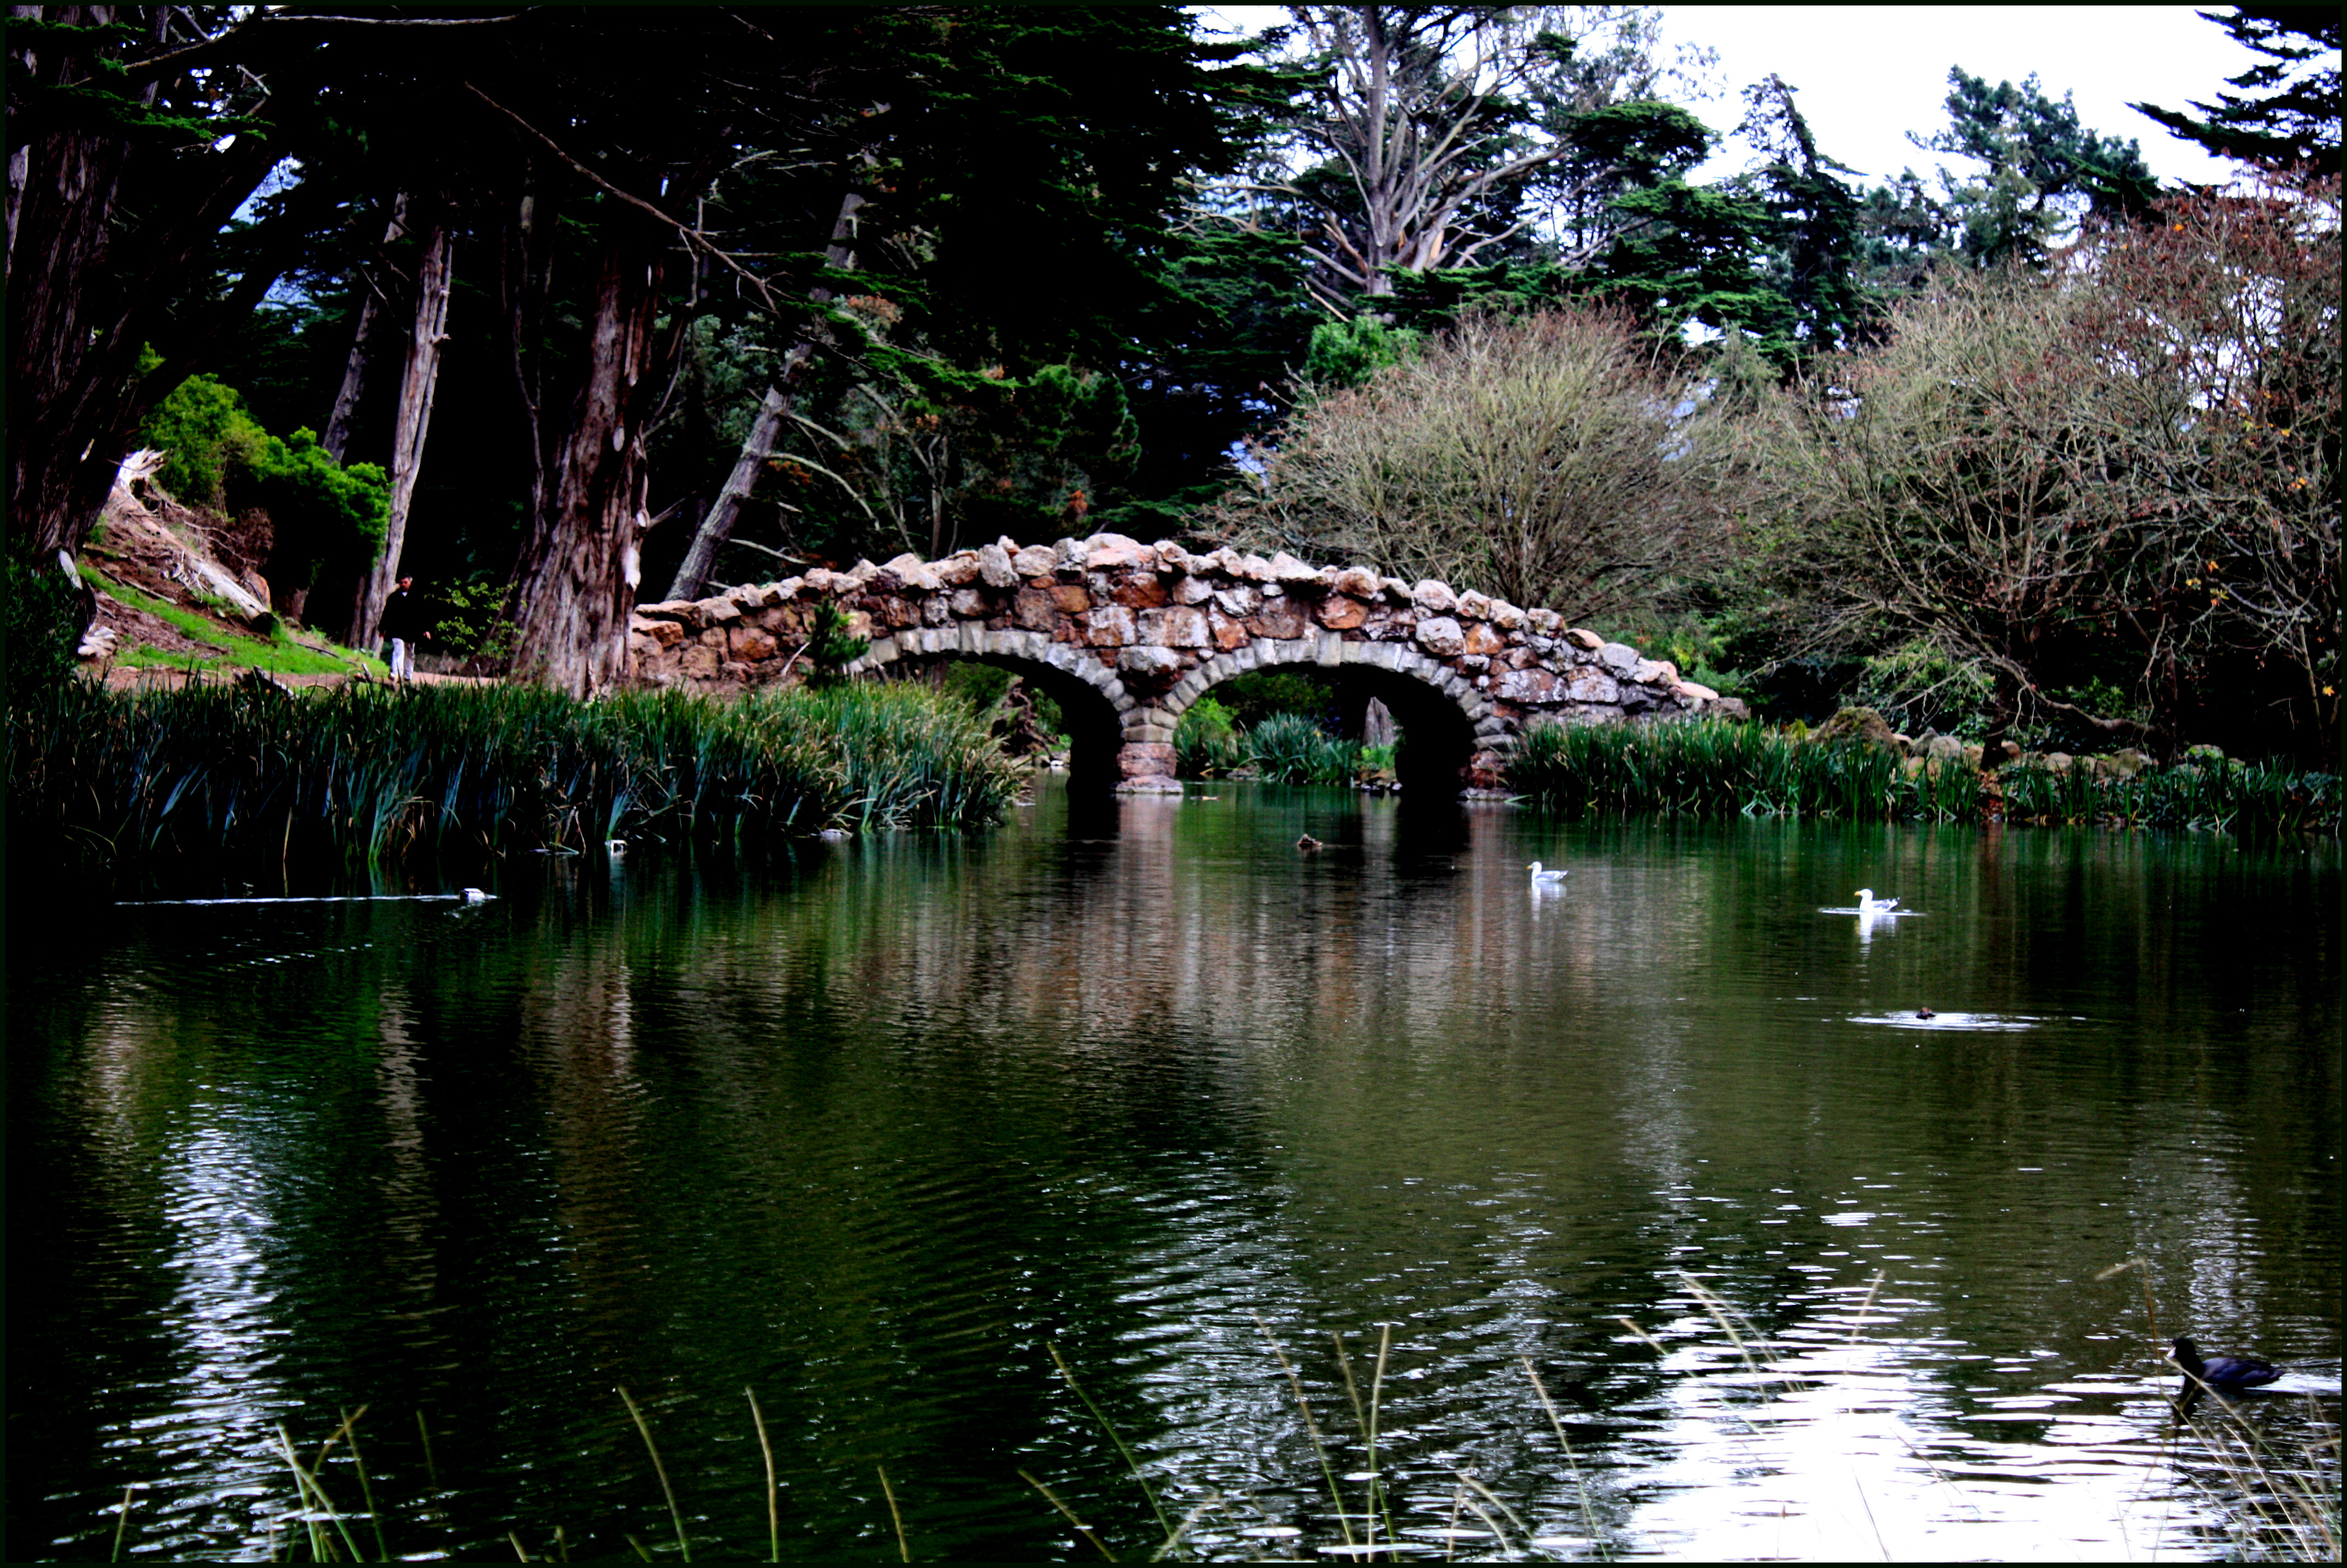 Stow Lake on an overcast day